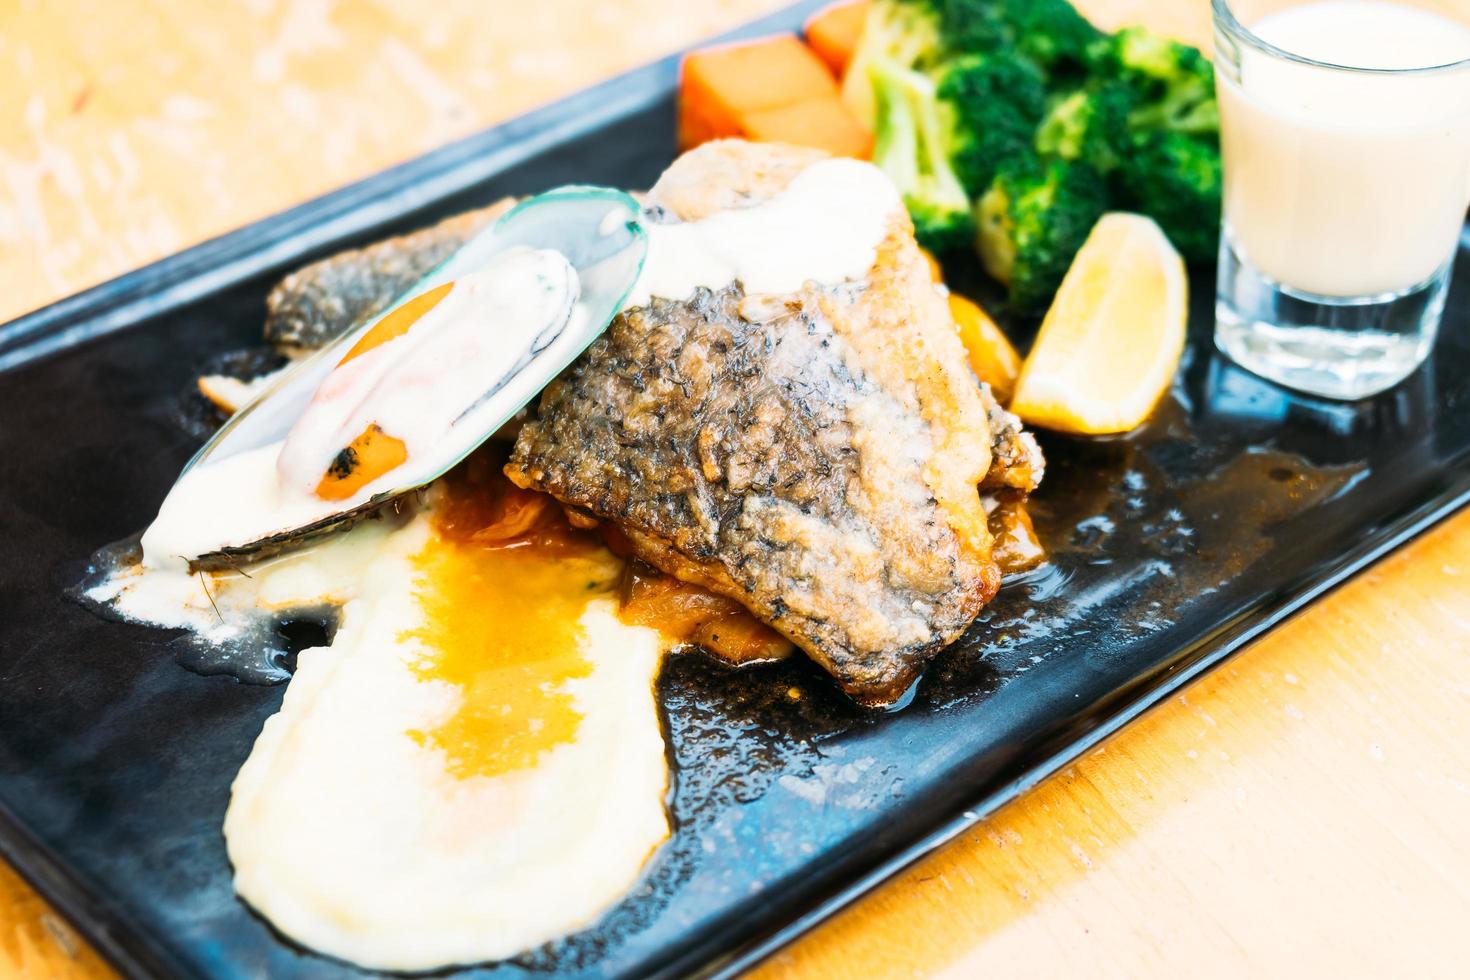 Sea bass and mussel steak photo